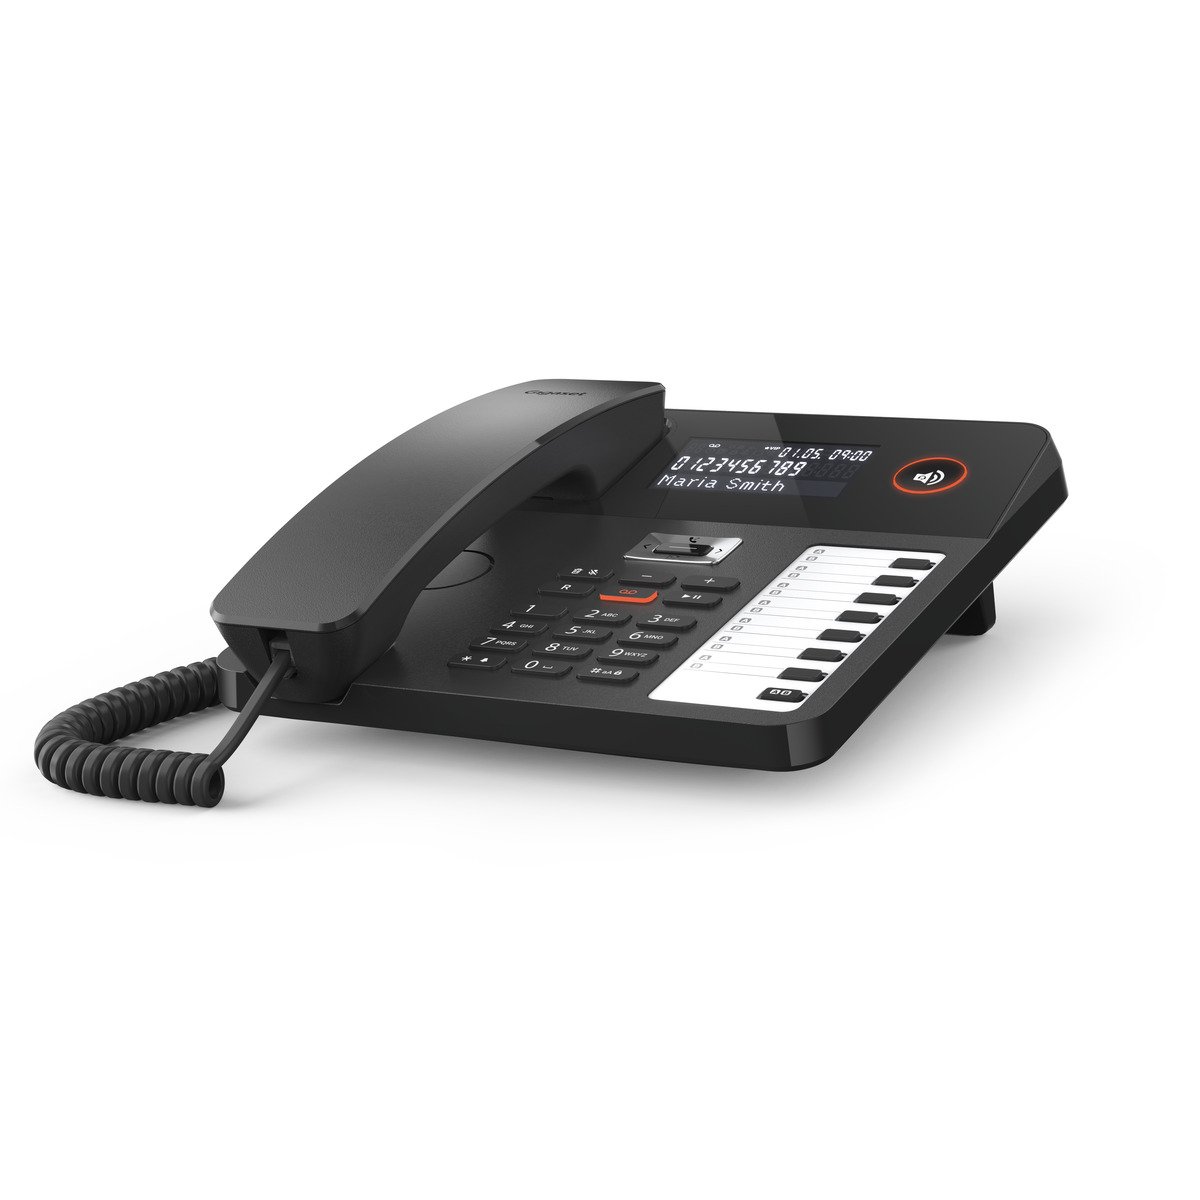 Discover the wall and Gigaset desk answering DESK machine 800A with telephone